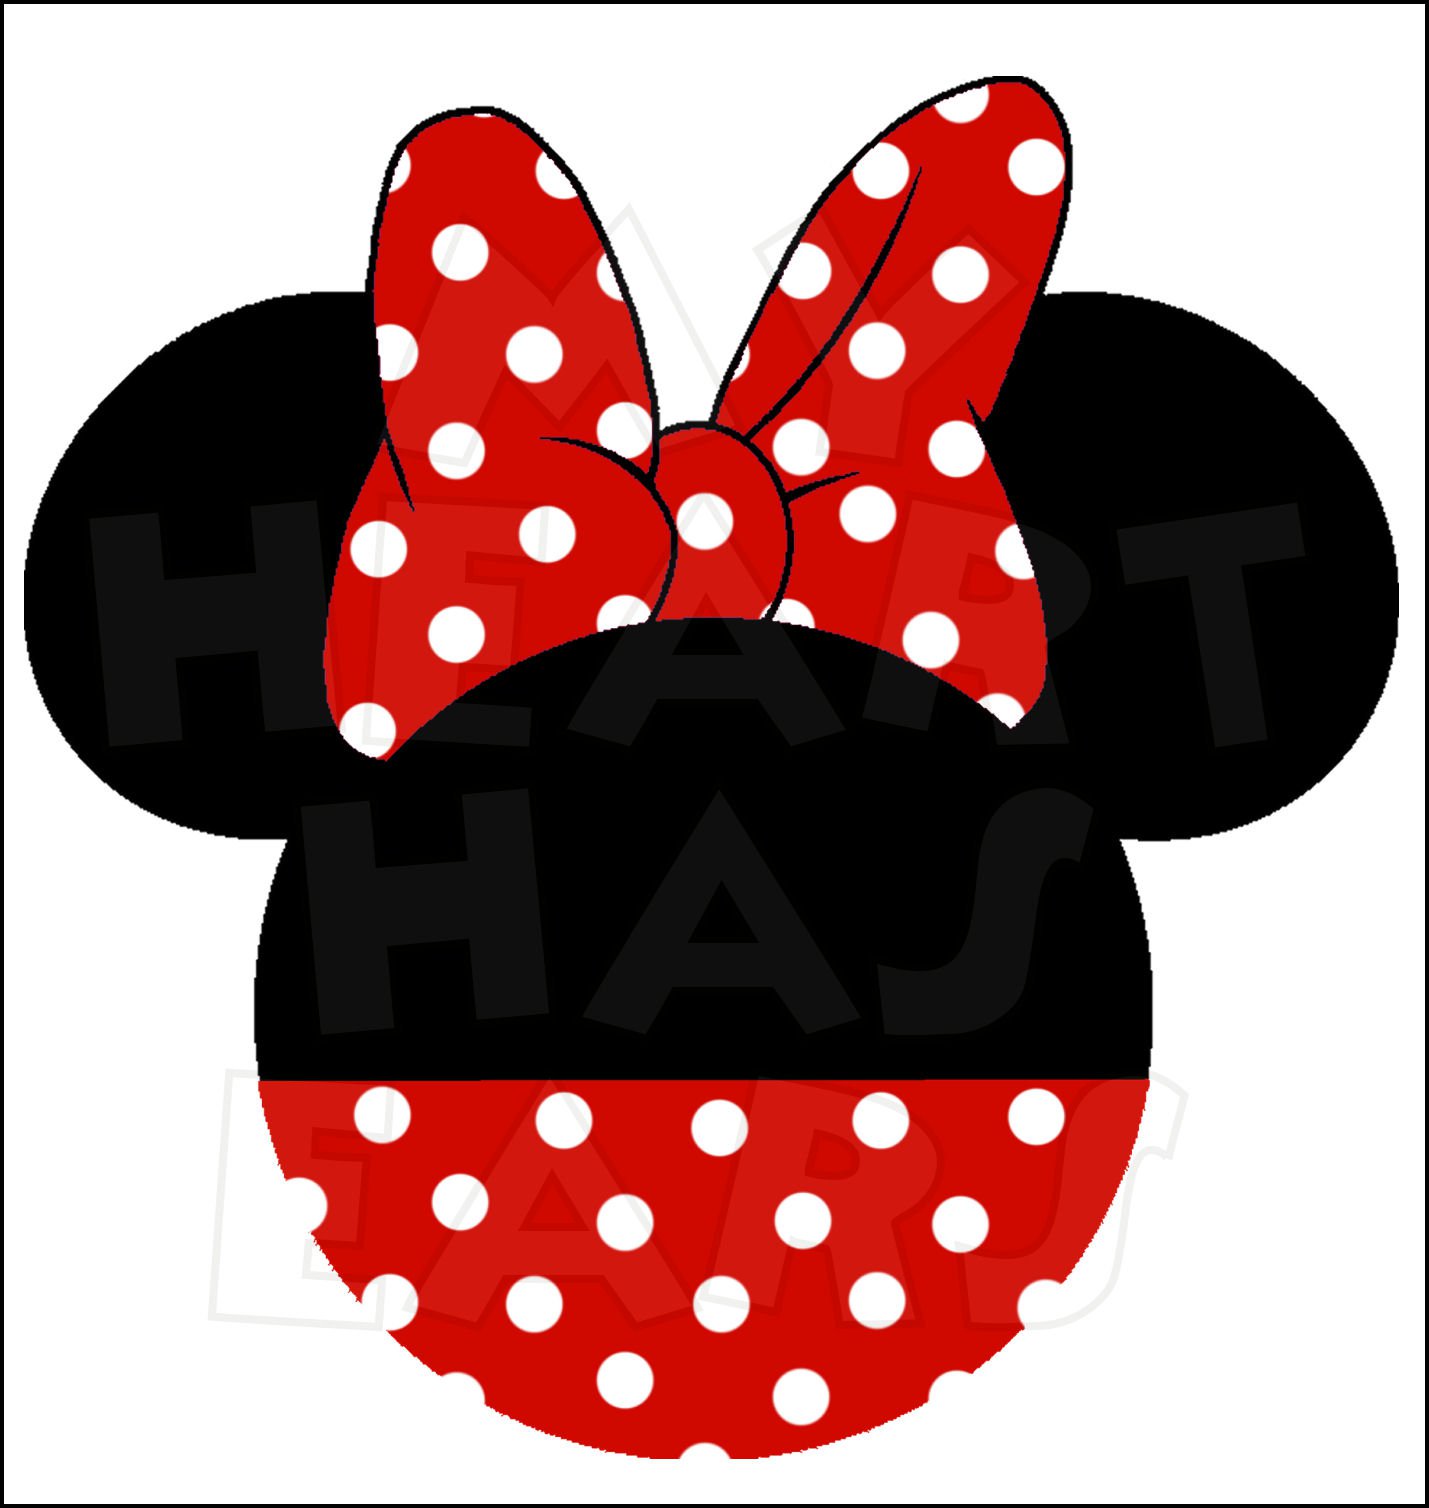 Mickey and minnie mouse clip art